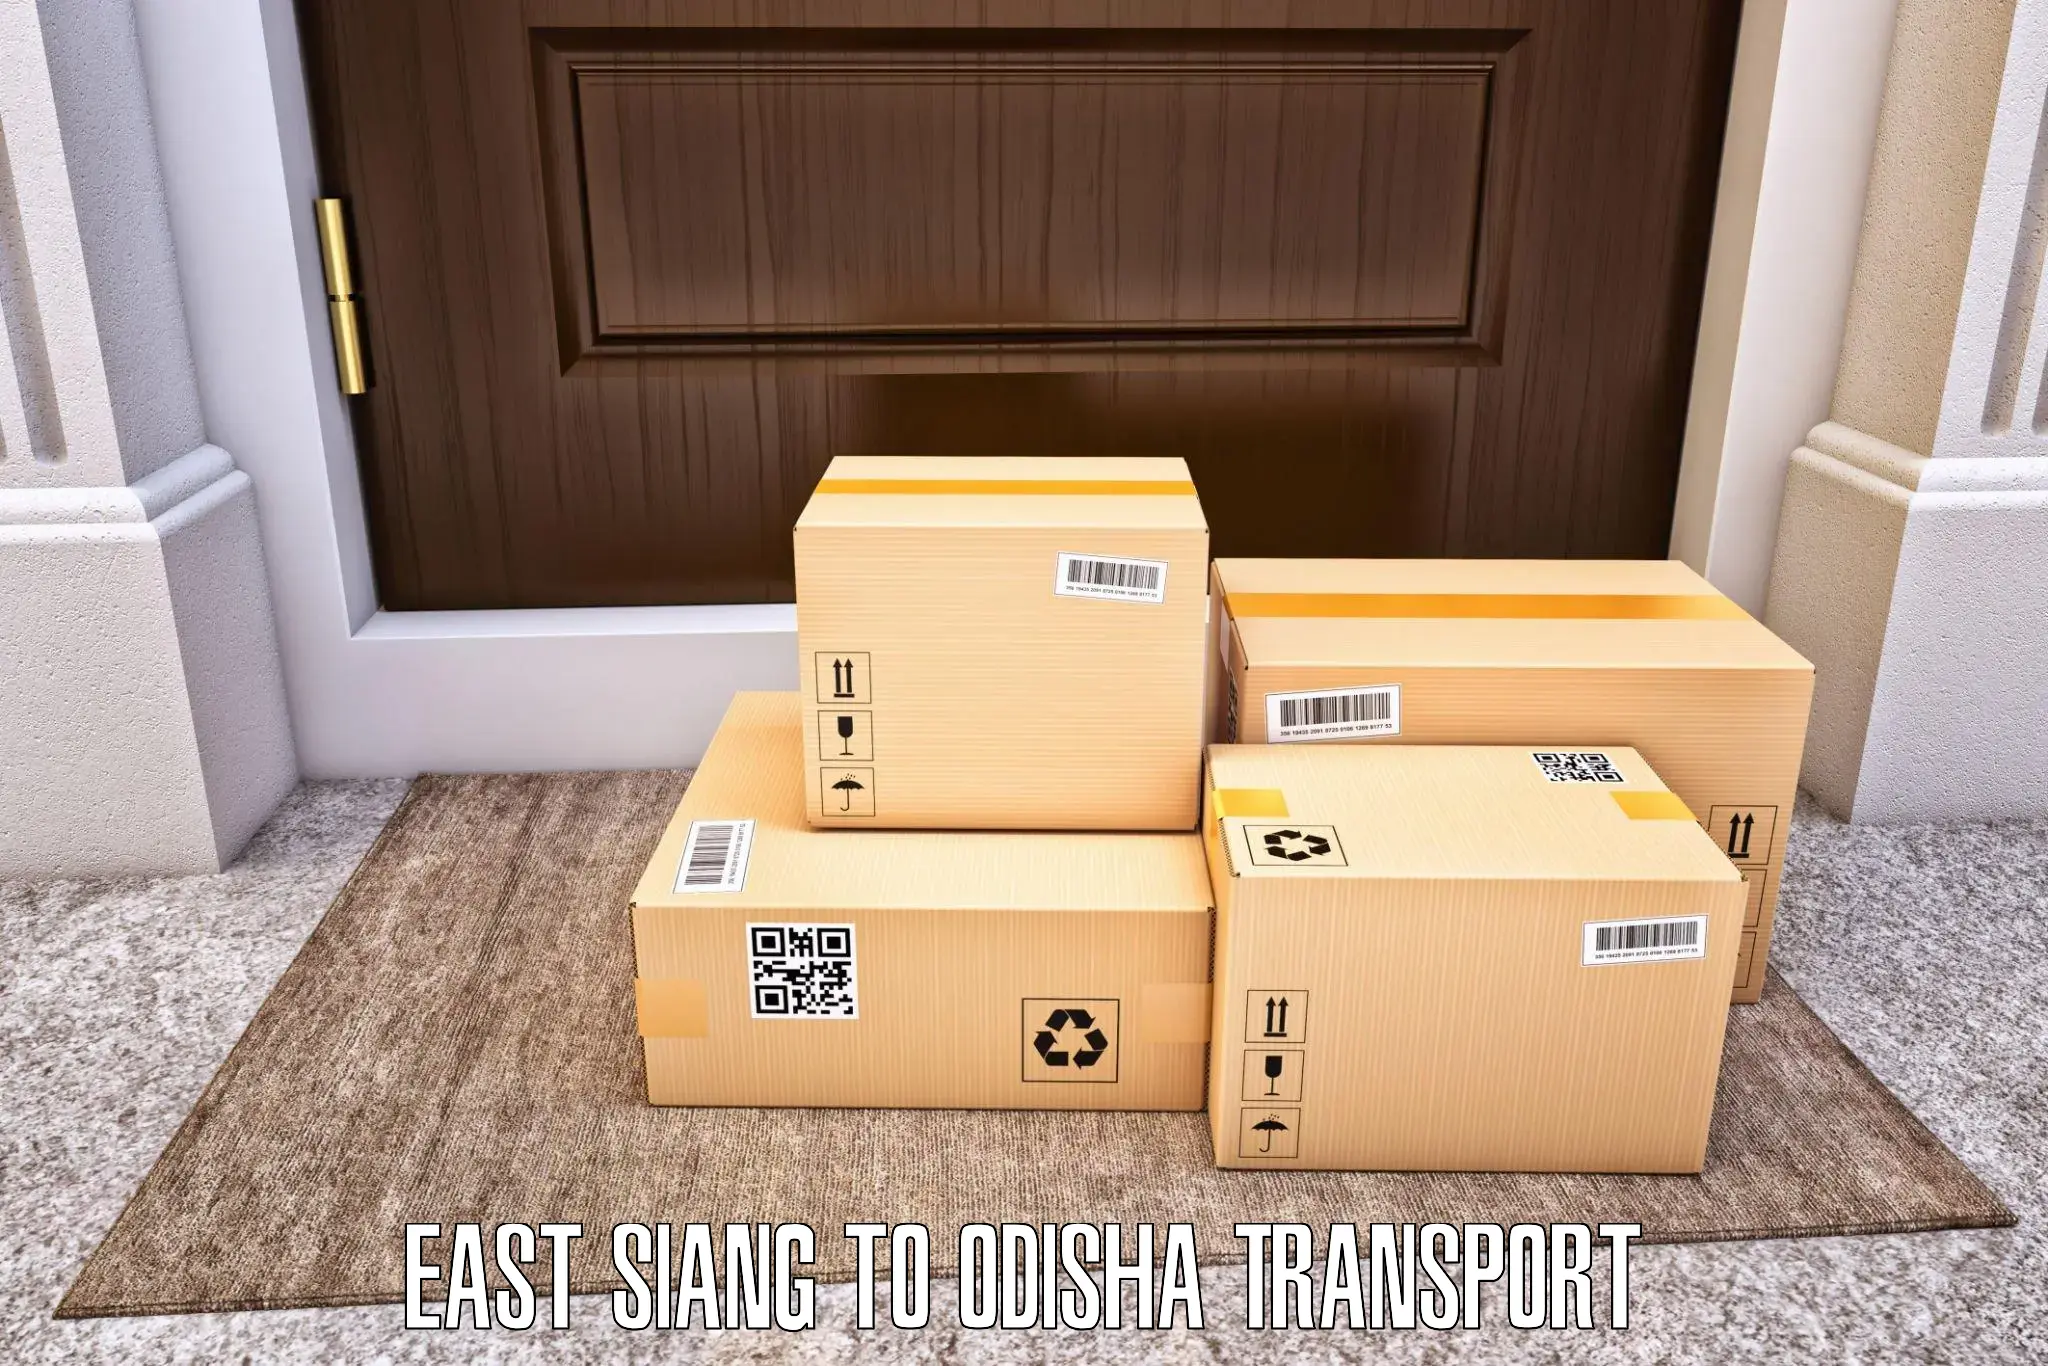 Nearby transport service East Siang to Joda